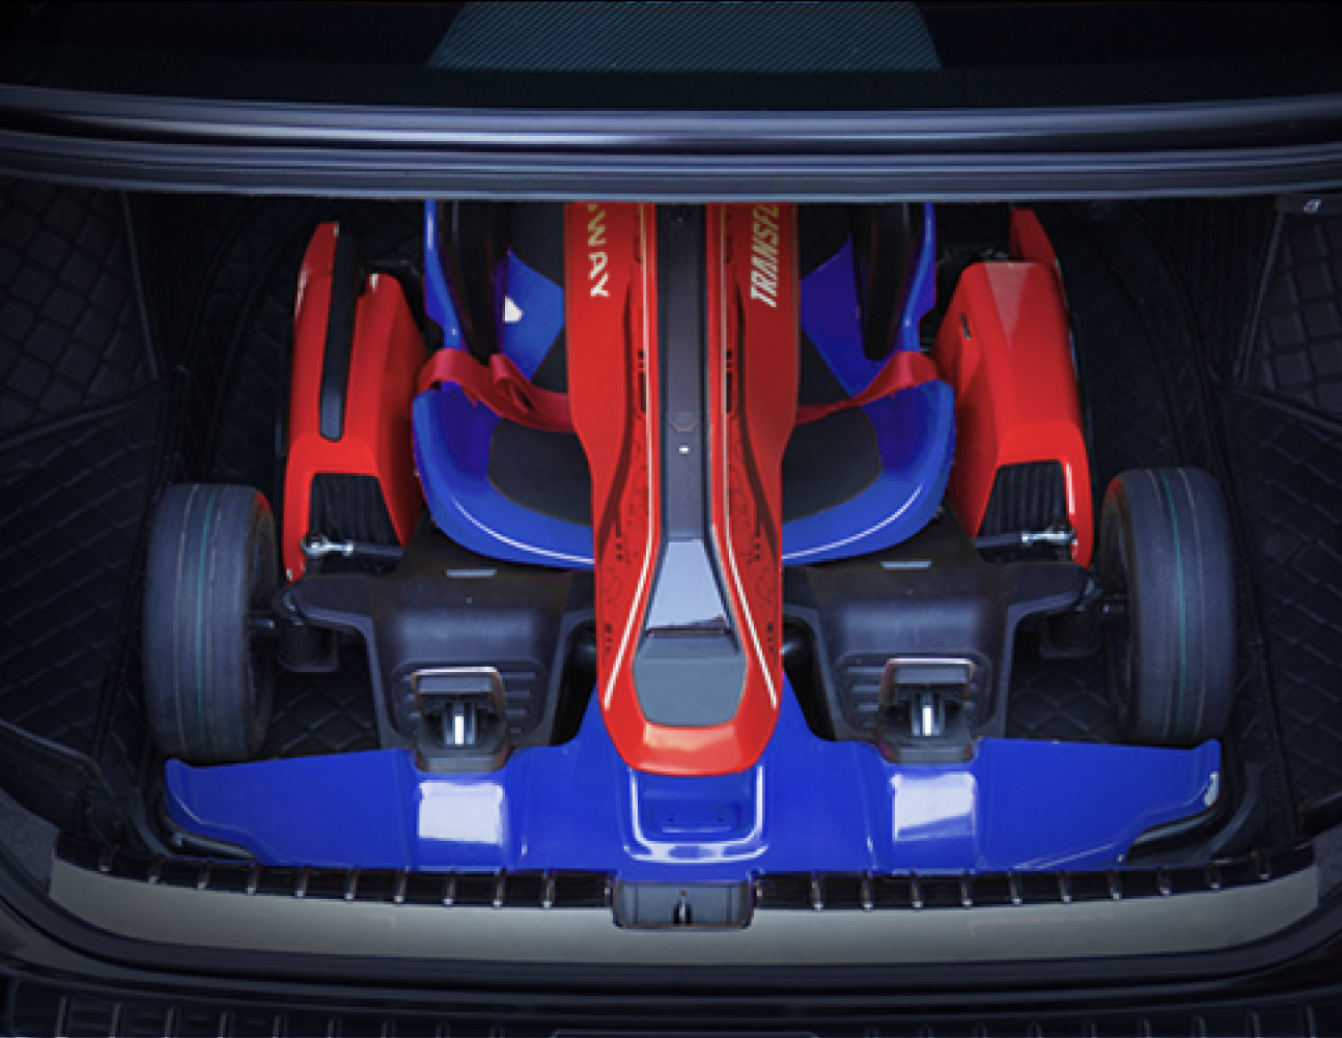 Segway Optimus Prime electric gokart fit into a trunk